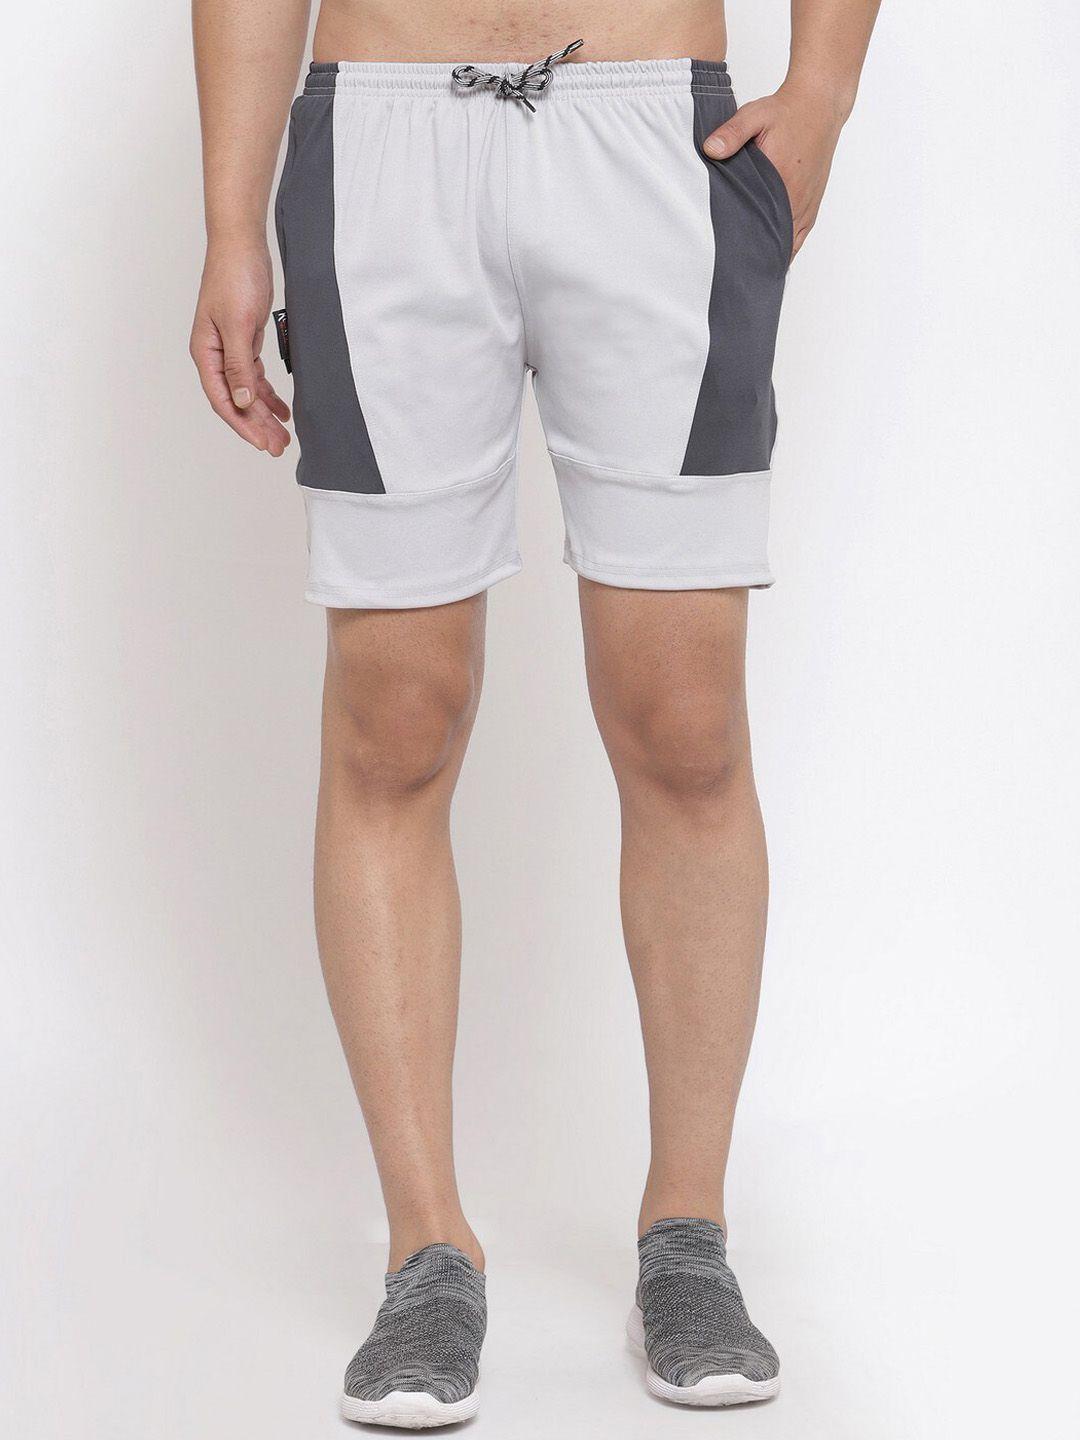 klotthe men mid rise sport shorts with rapid dry technology